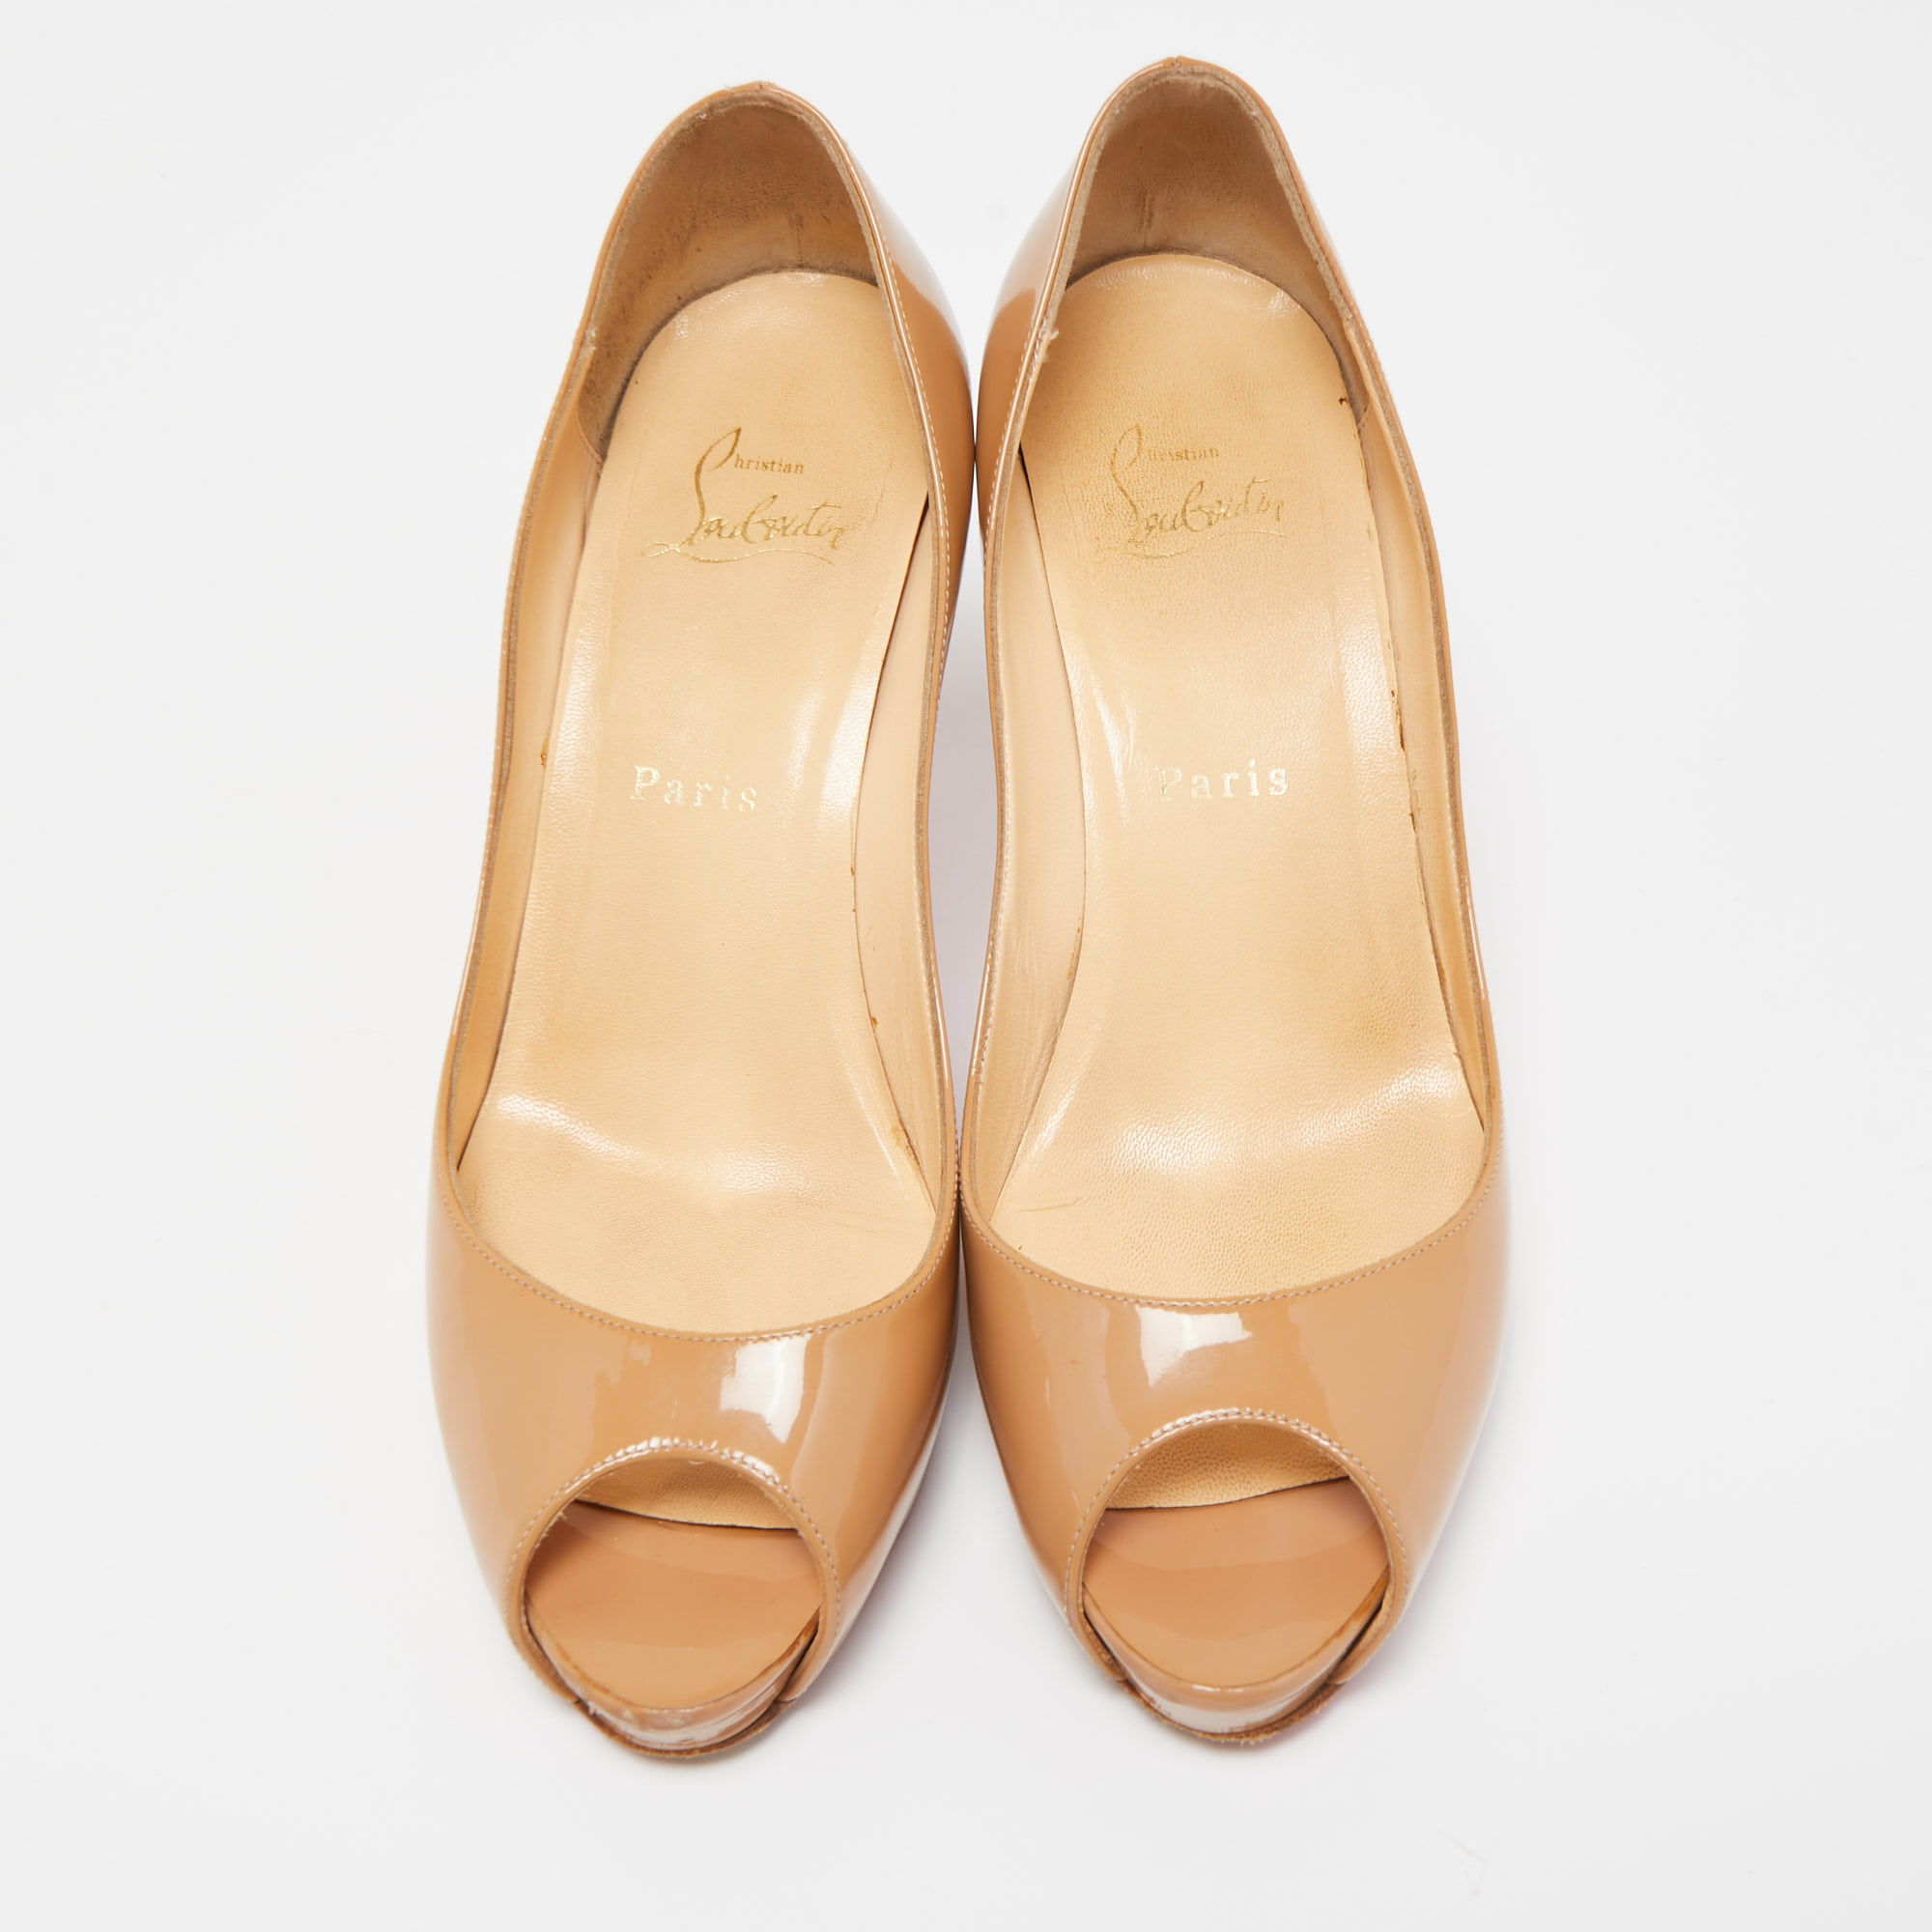 Christian Louboutin Beige Patent Leather Very Prive Pumps Size 37